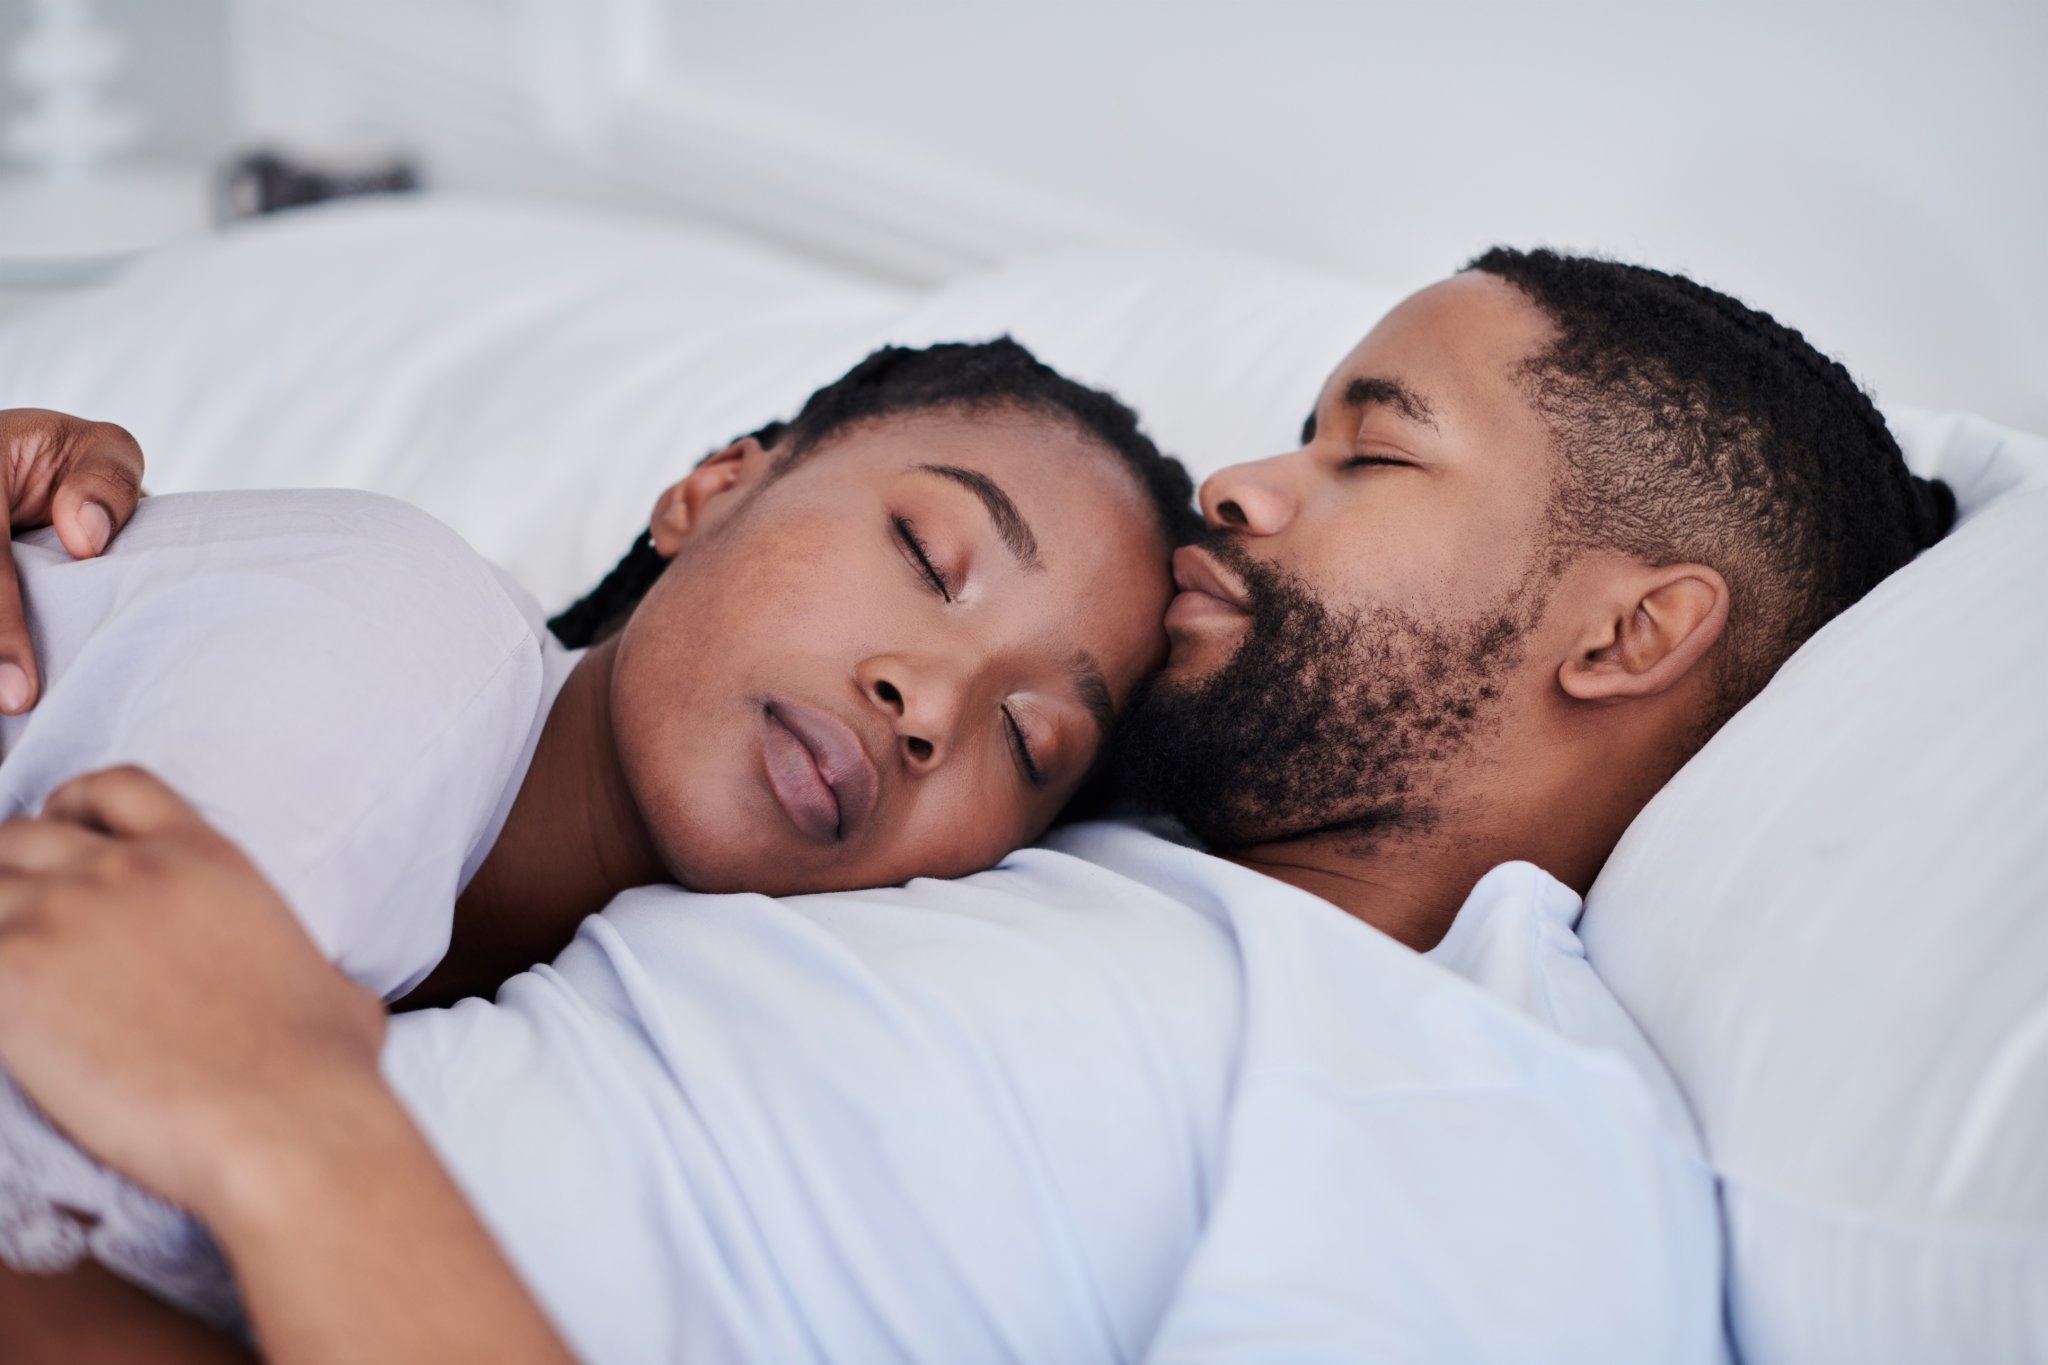 It Turns Out The Way You Sleep With Your Partner Says Everything About The Relationship